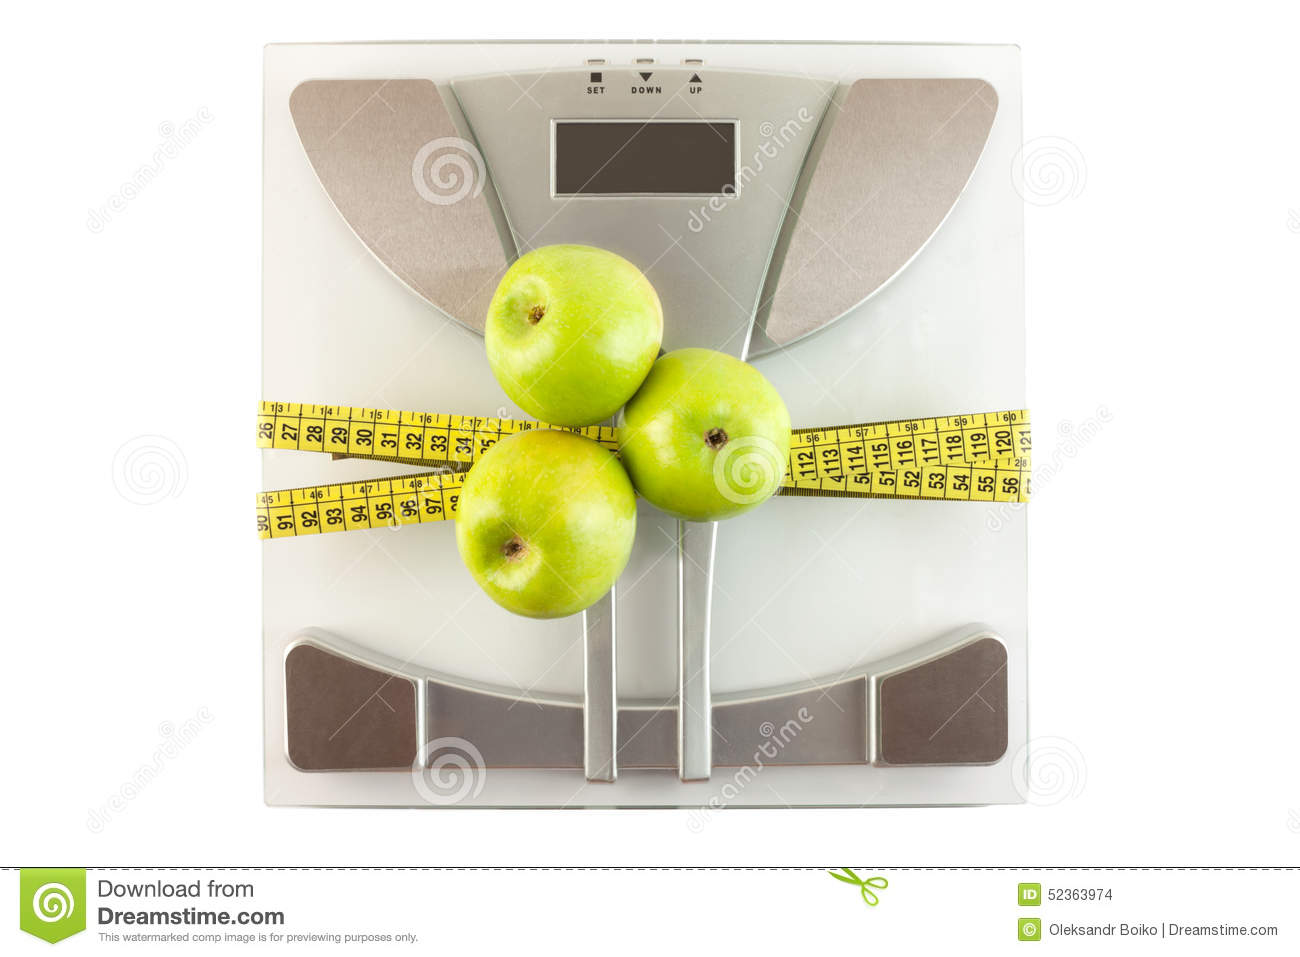 Scale With A Measuring Tape And Apple Stock Photo   Image  52363974